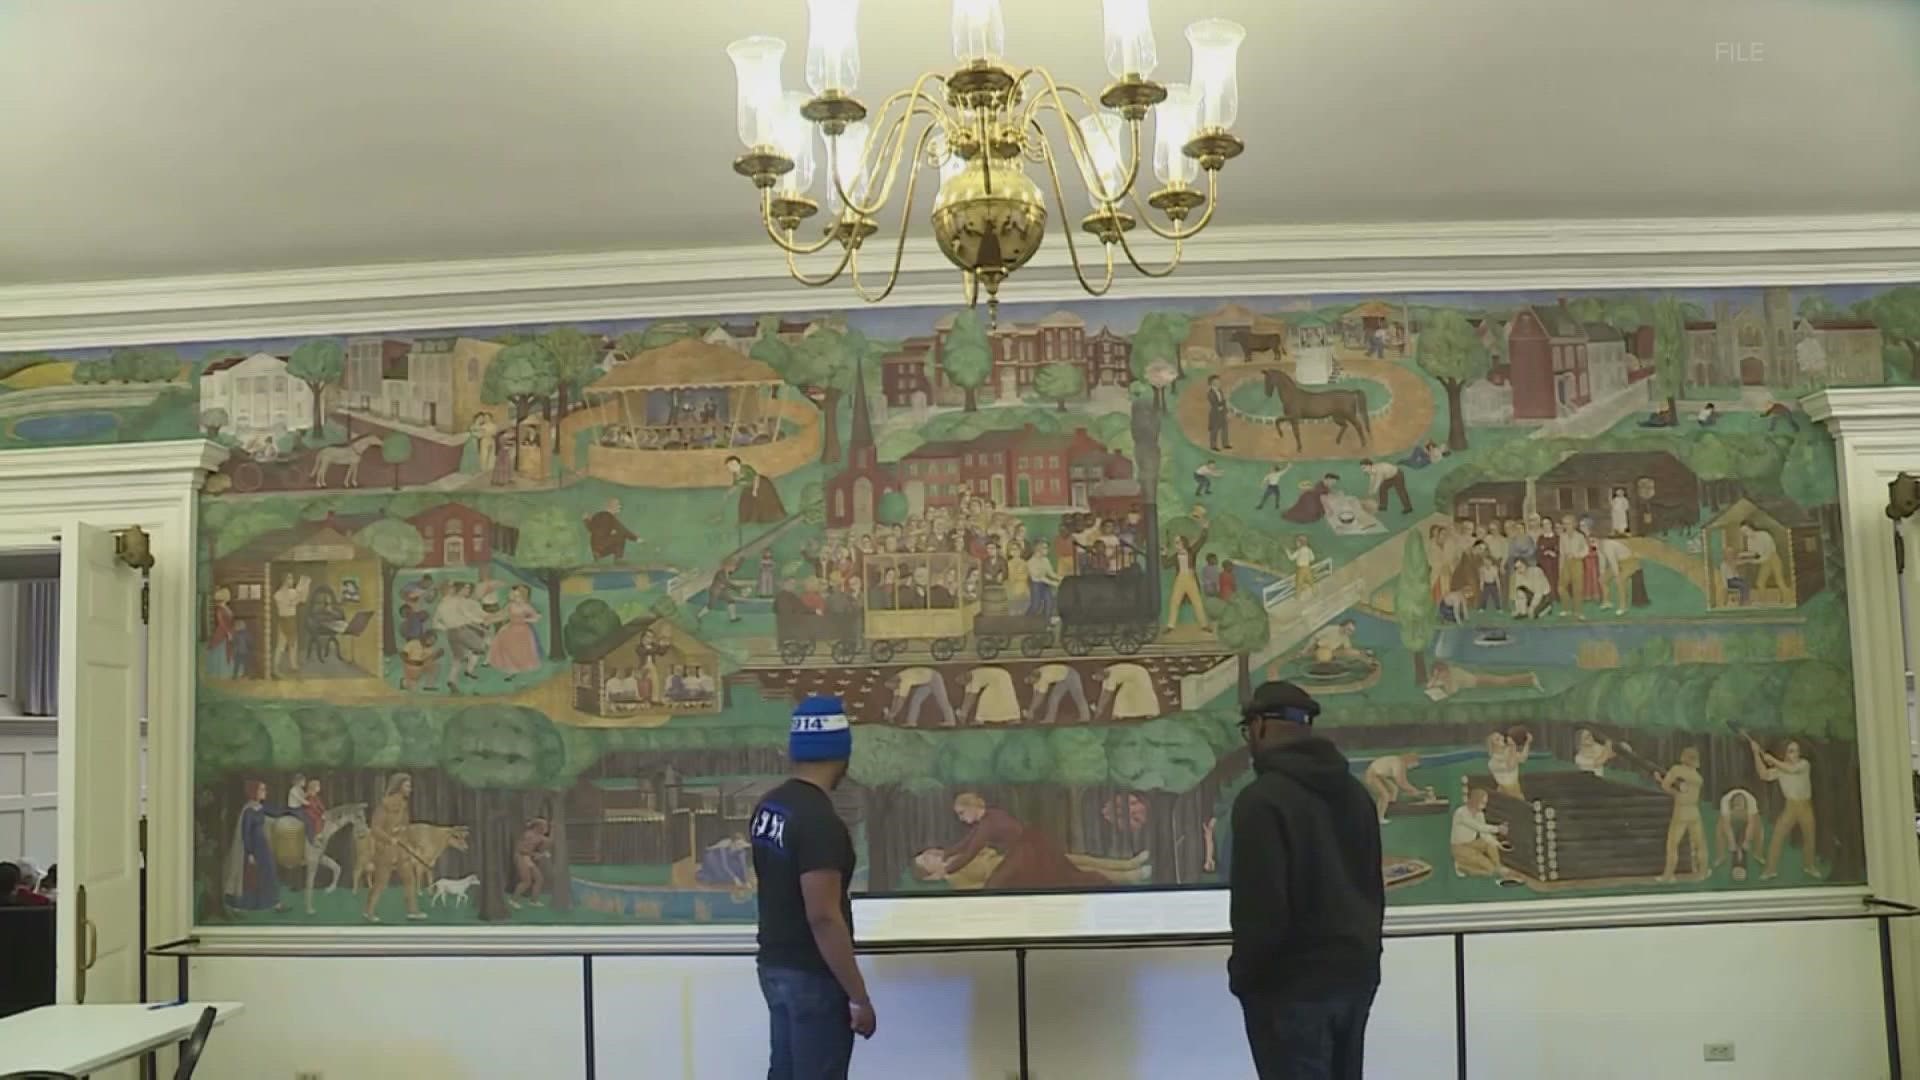 The mural illustrates the segregation of races by showing African Americans and Native American individuals working on farmland.